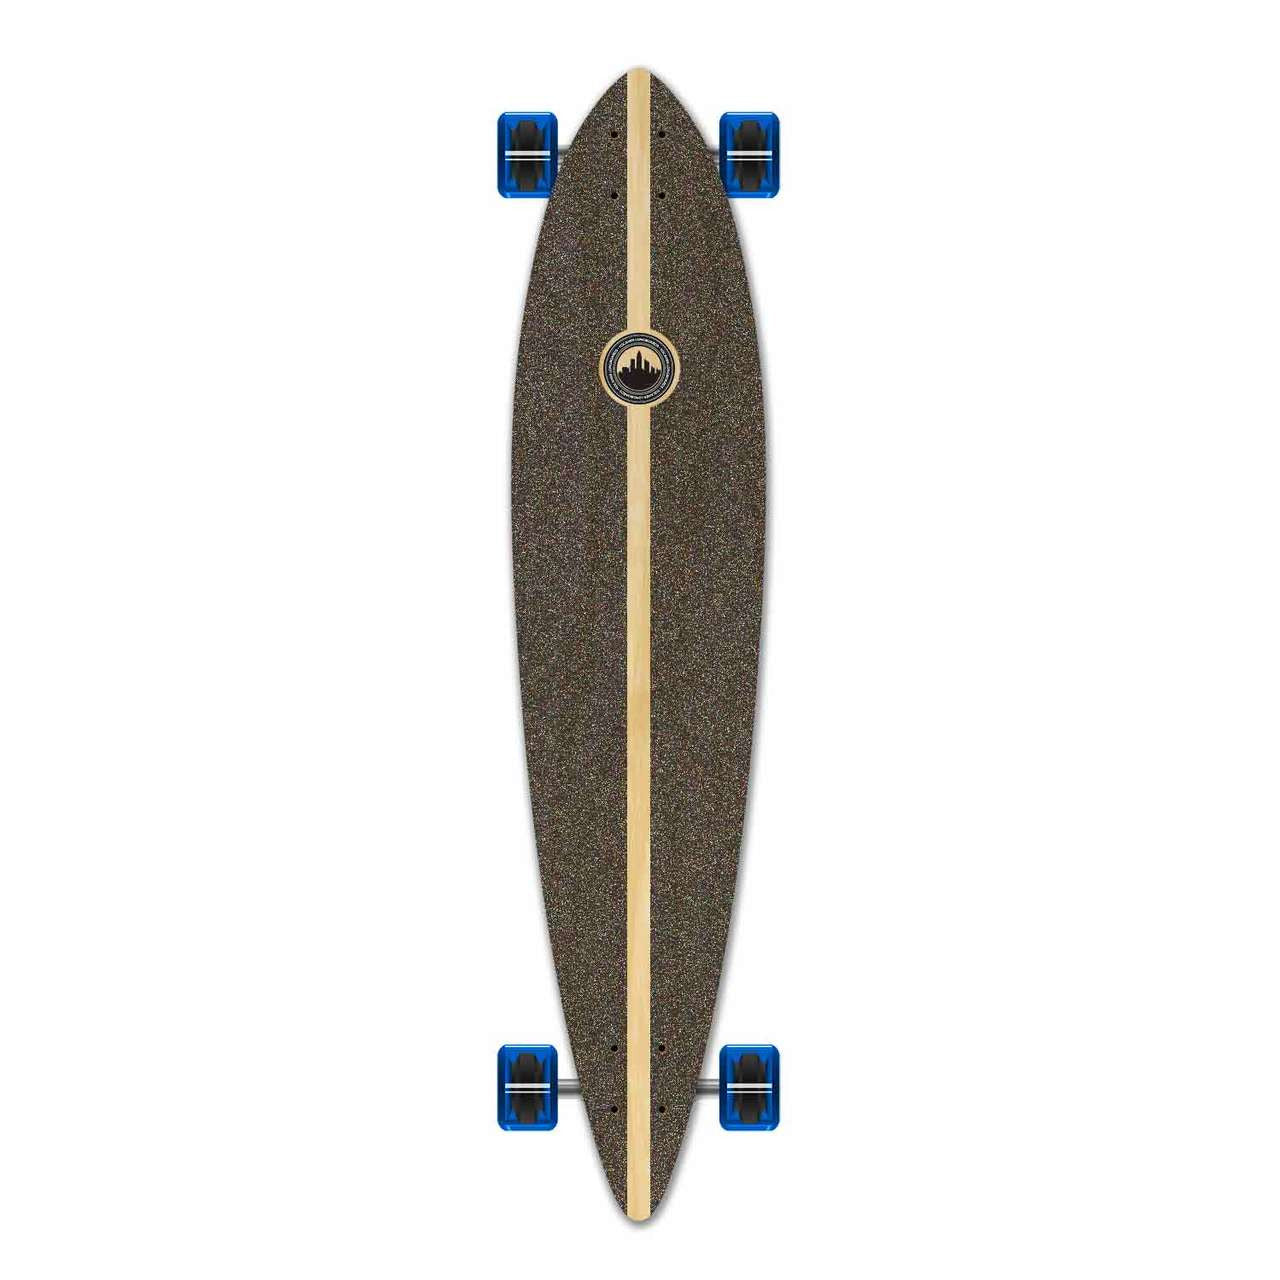 Yocaher Pintail Longboard Complete - White Digital Wave